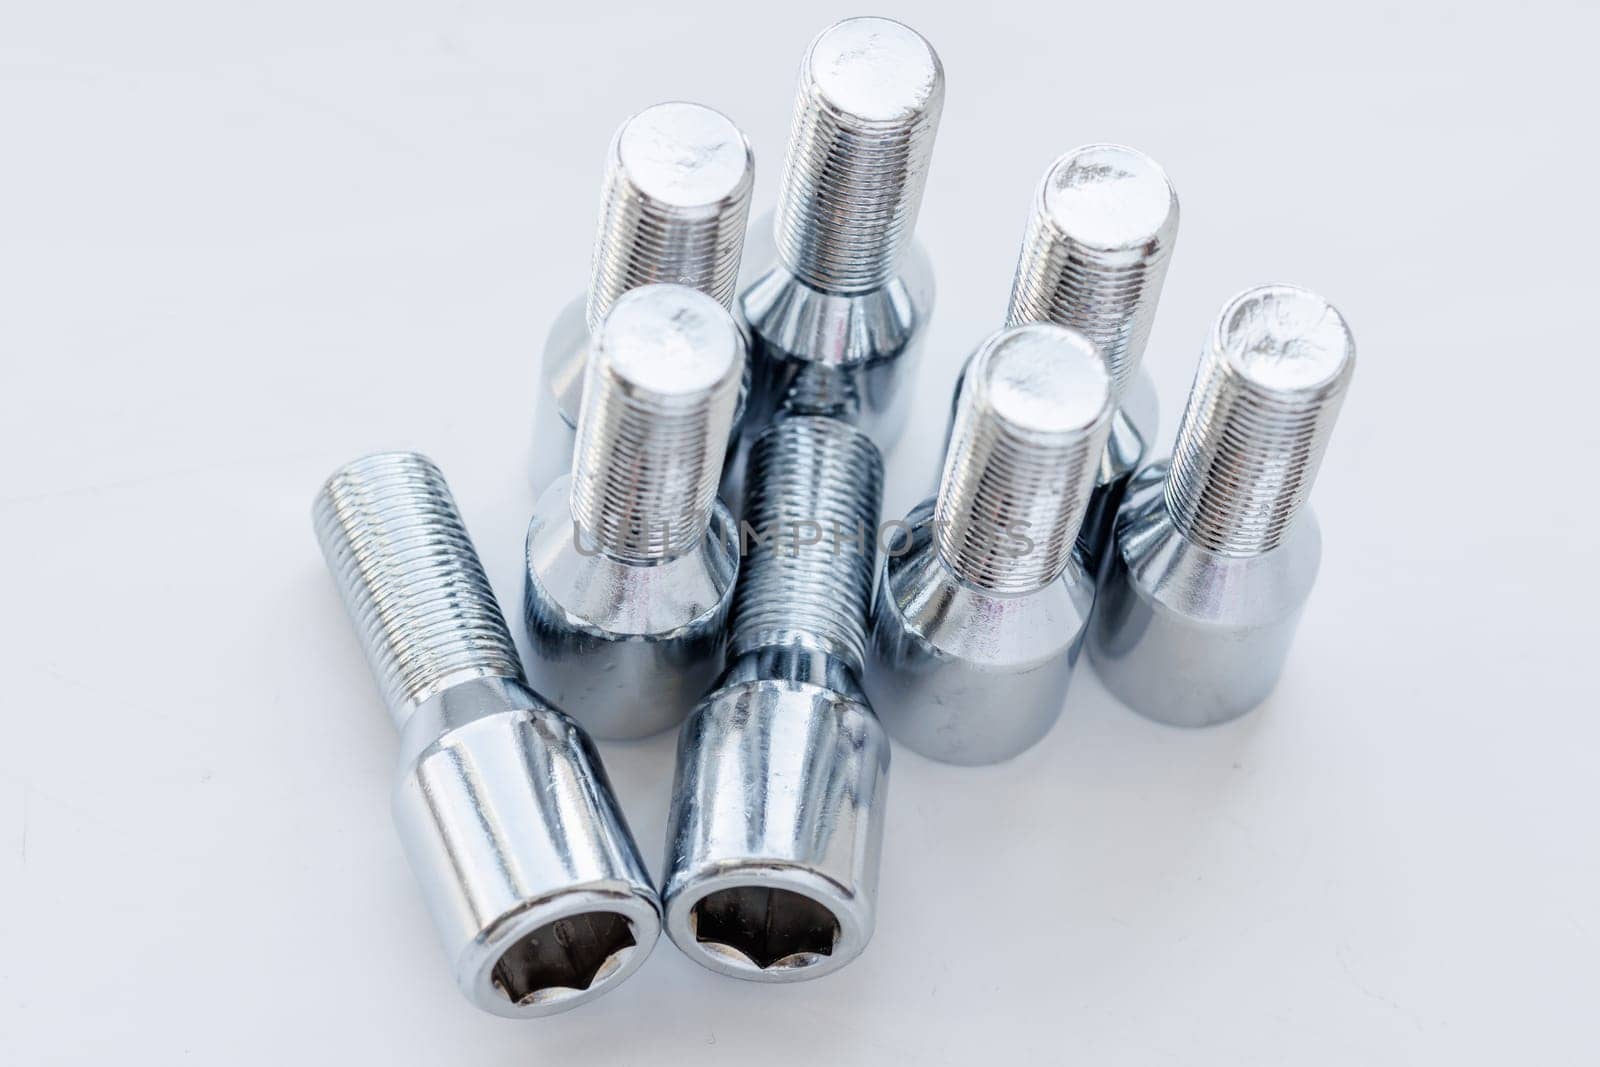 shiny steel chrome coated wheel bolts on white background, full-frame closeup high angle view by z1b